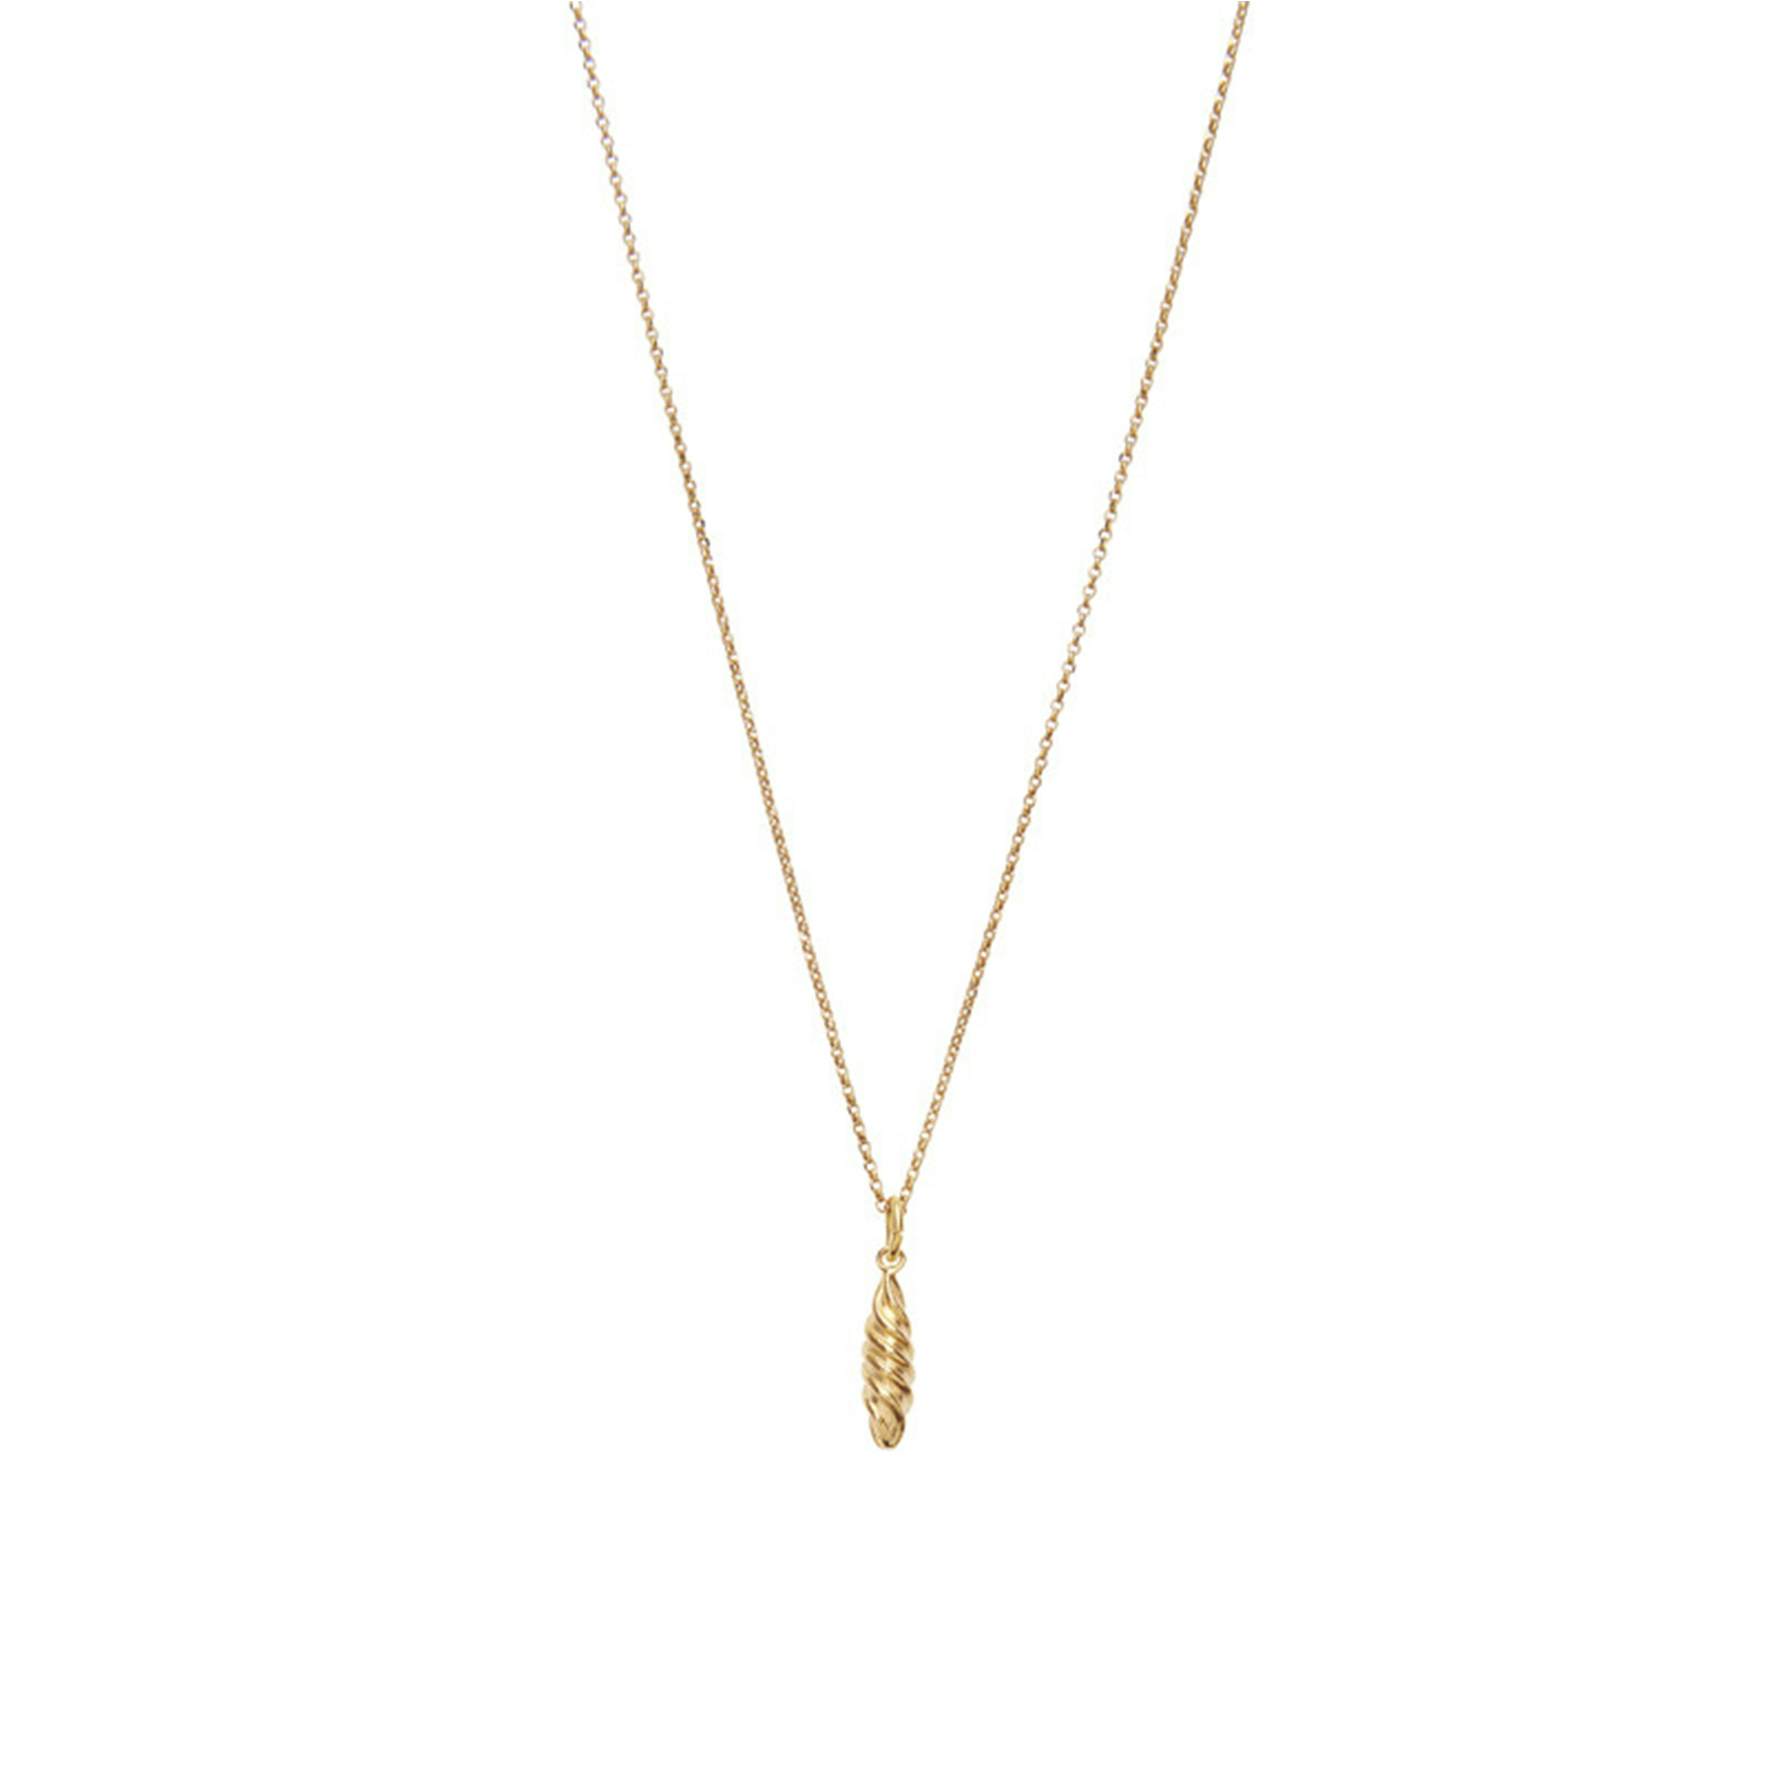 Emery Grande Necklace from Pico in Goldplated-Silver Sterling 925